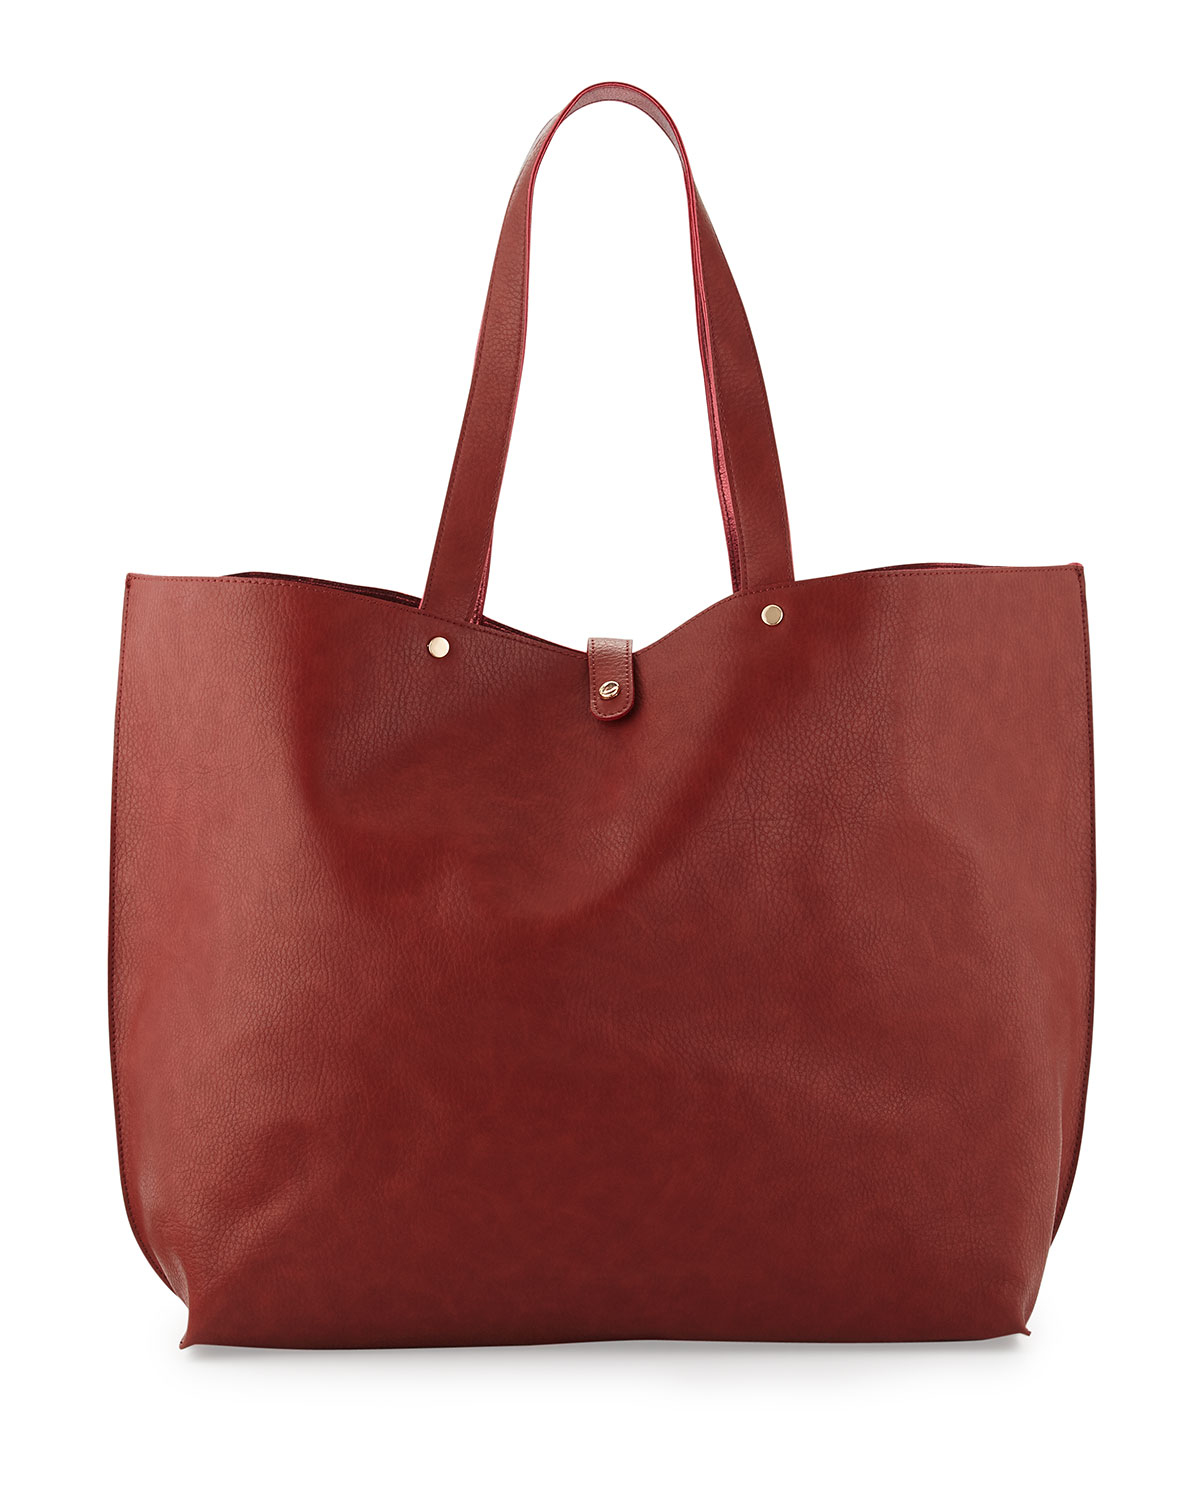 Neiman Marcus Large Pebbled Faux-leather Tote Bag in Red - Lyst